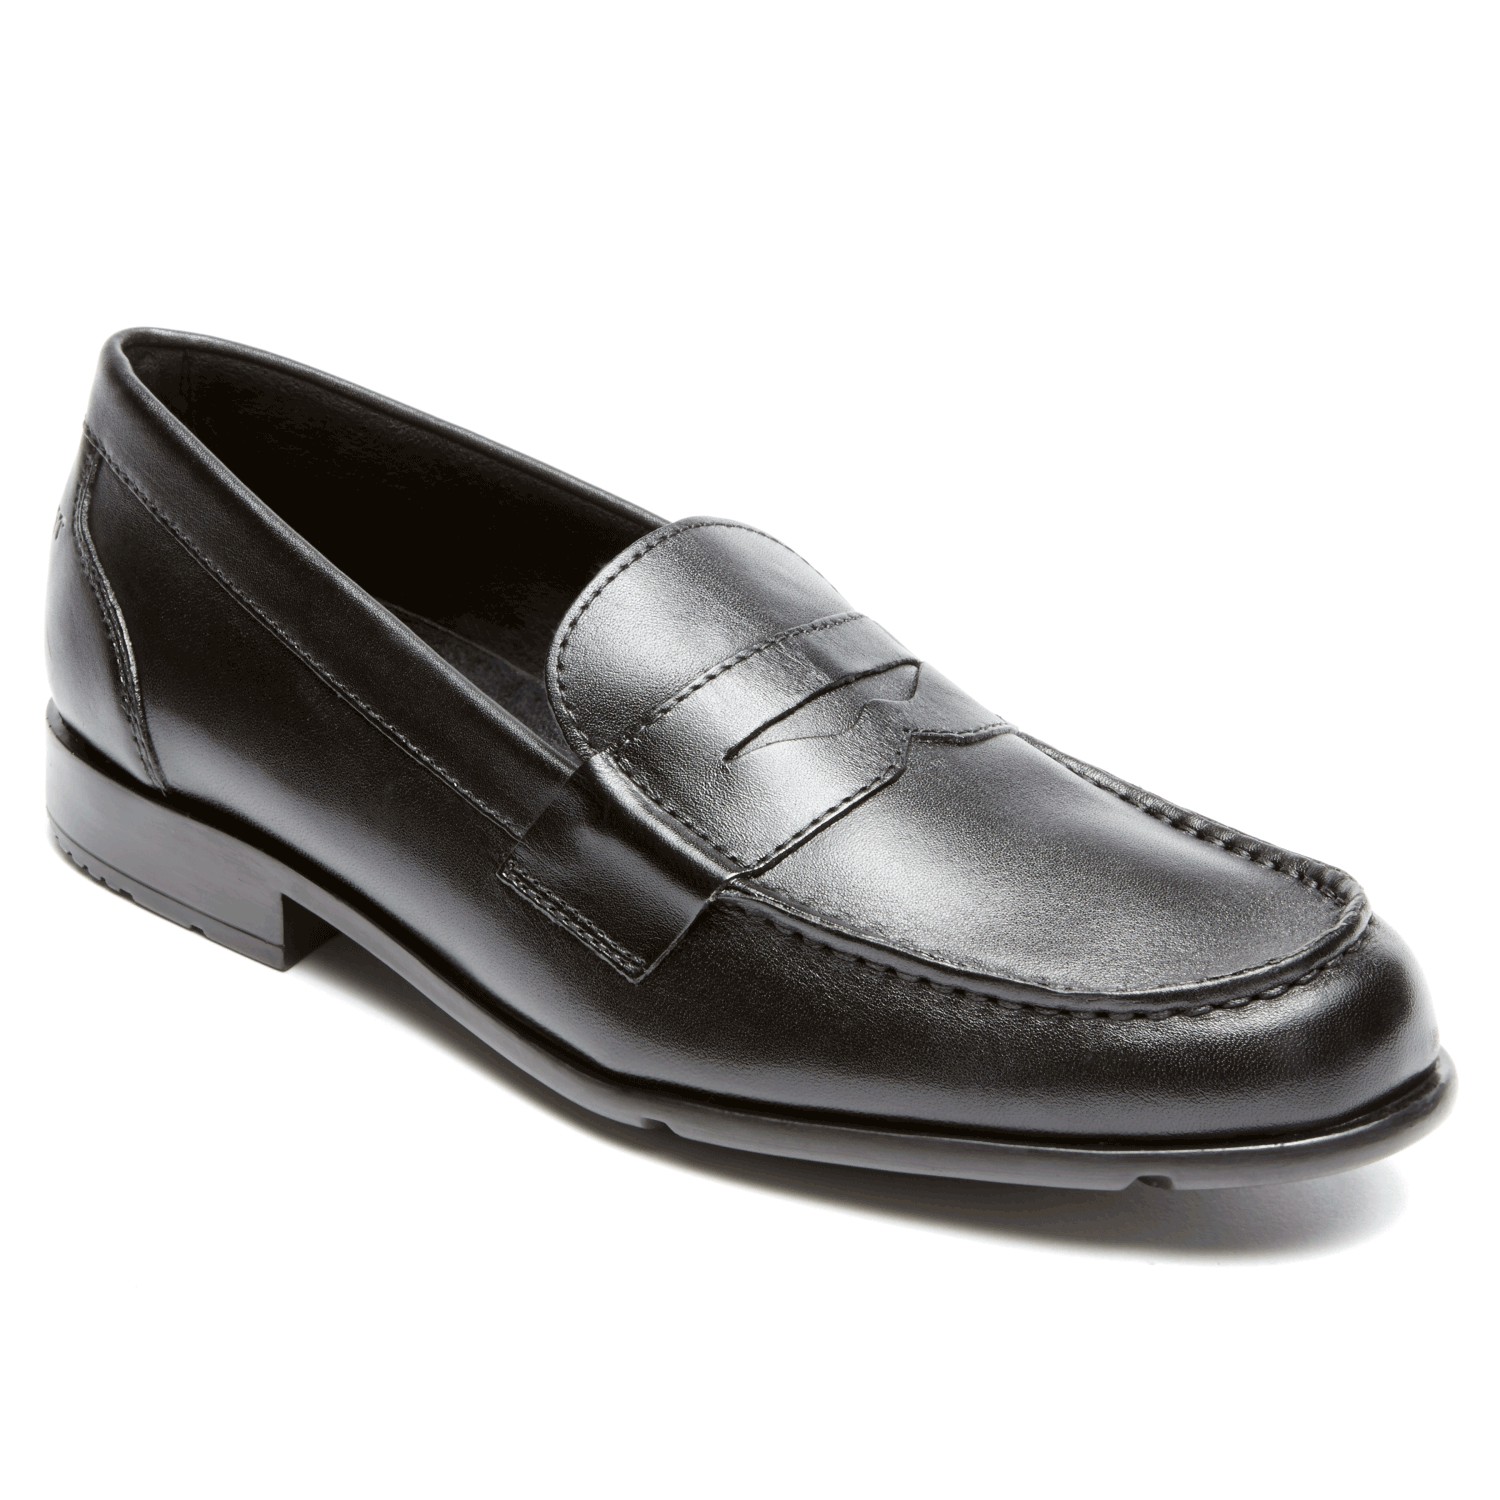 men's classic loafers